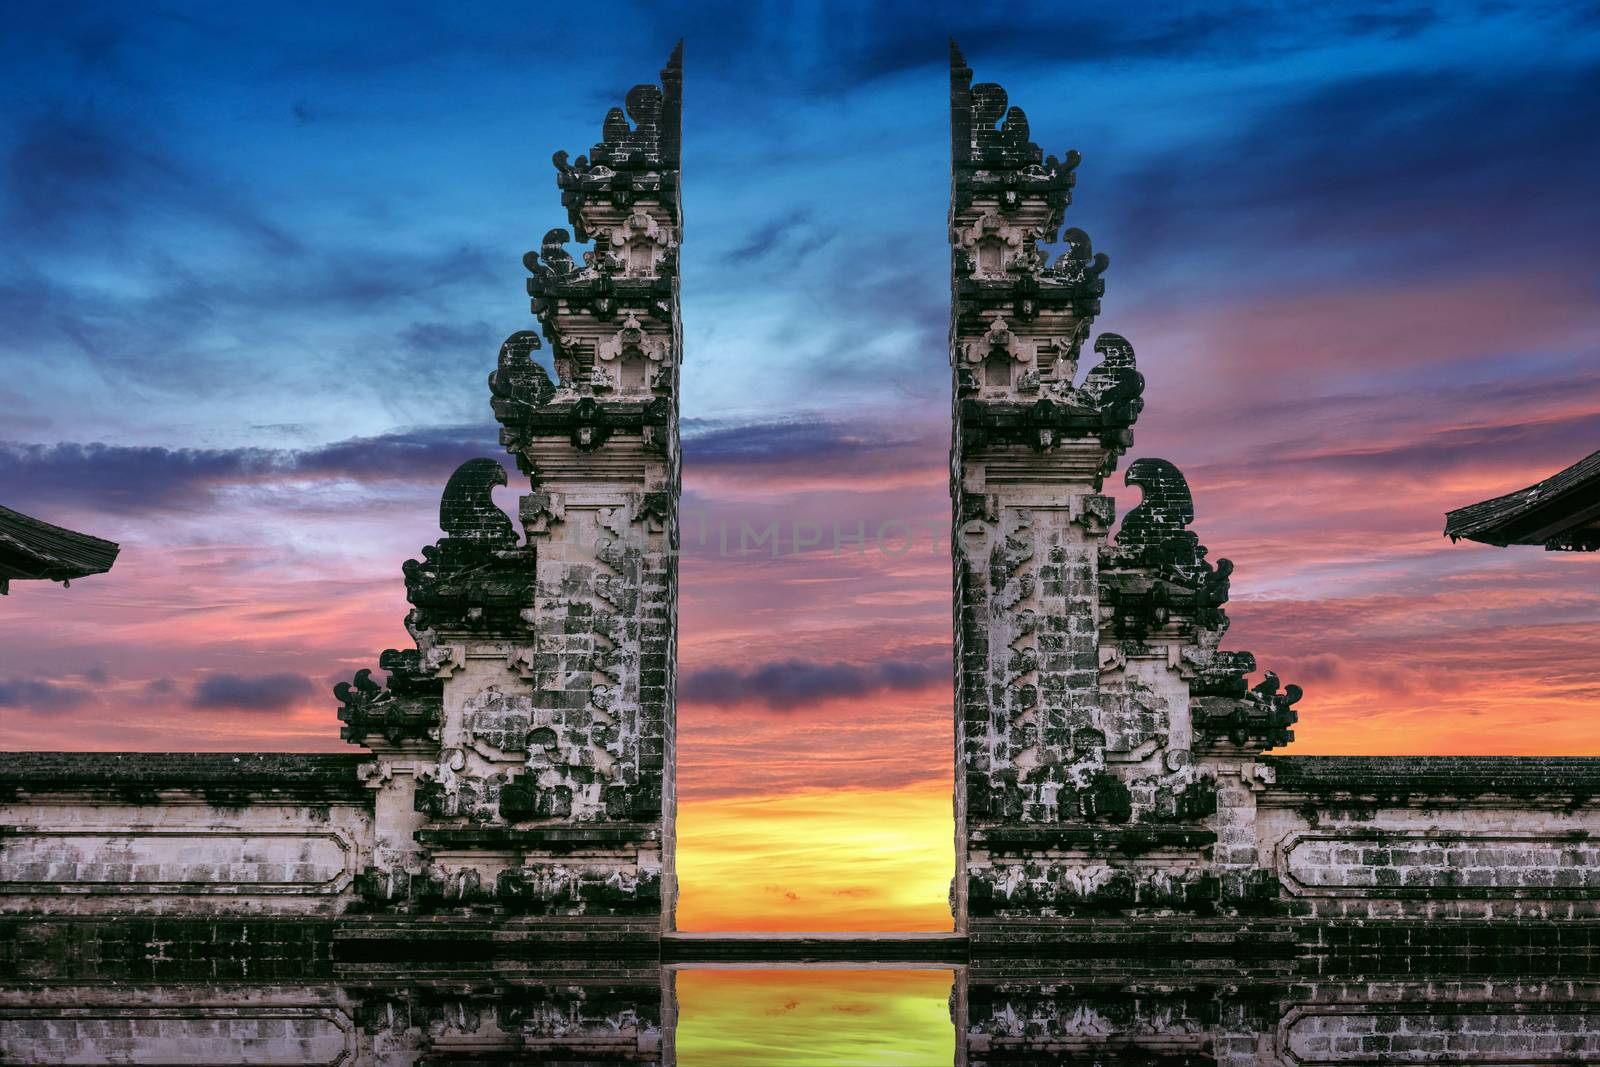 Temple gates at Lempuyang Luhur temple in Bali, Indonesia. by gutarphotoghaphy